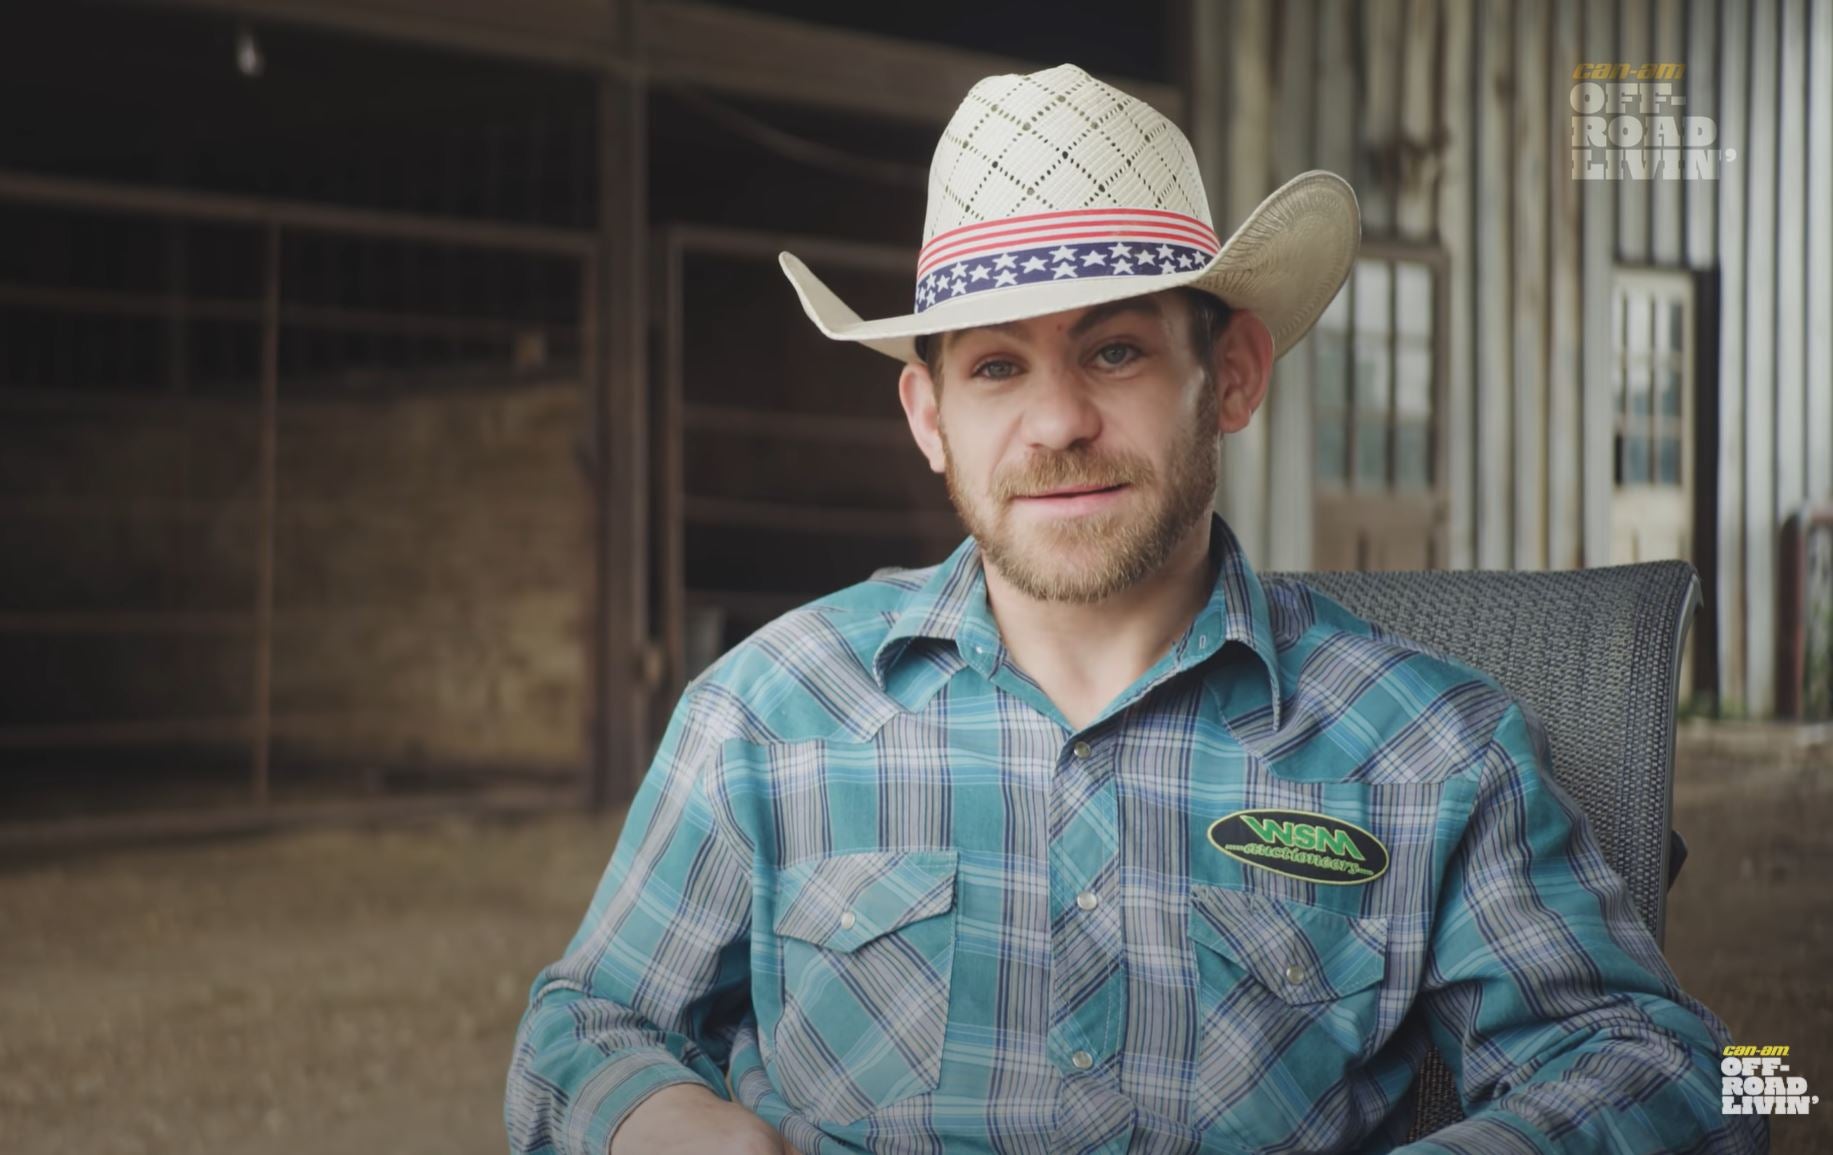 Livin' The Land series up close with bull rider Chase Outlaw AGDAILY